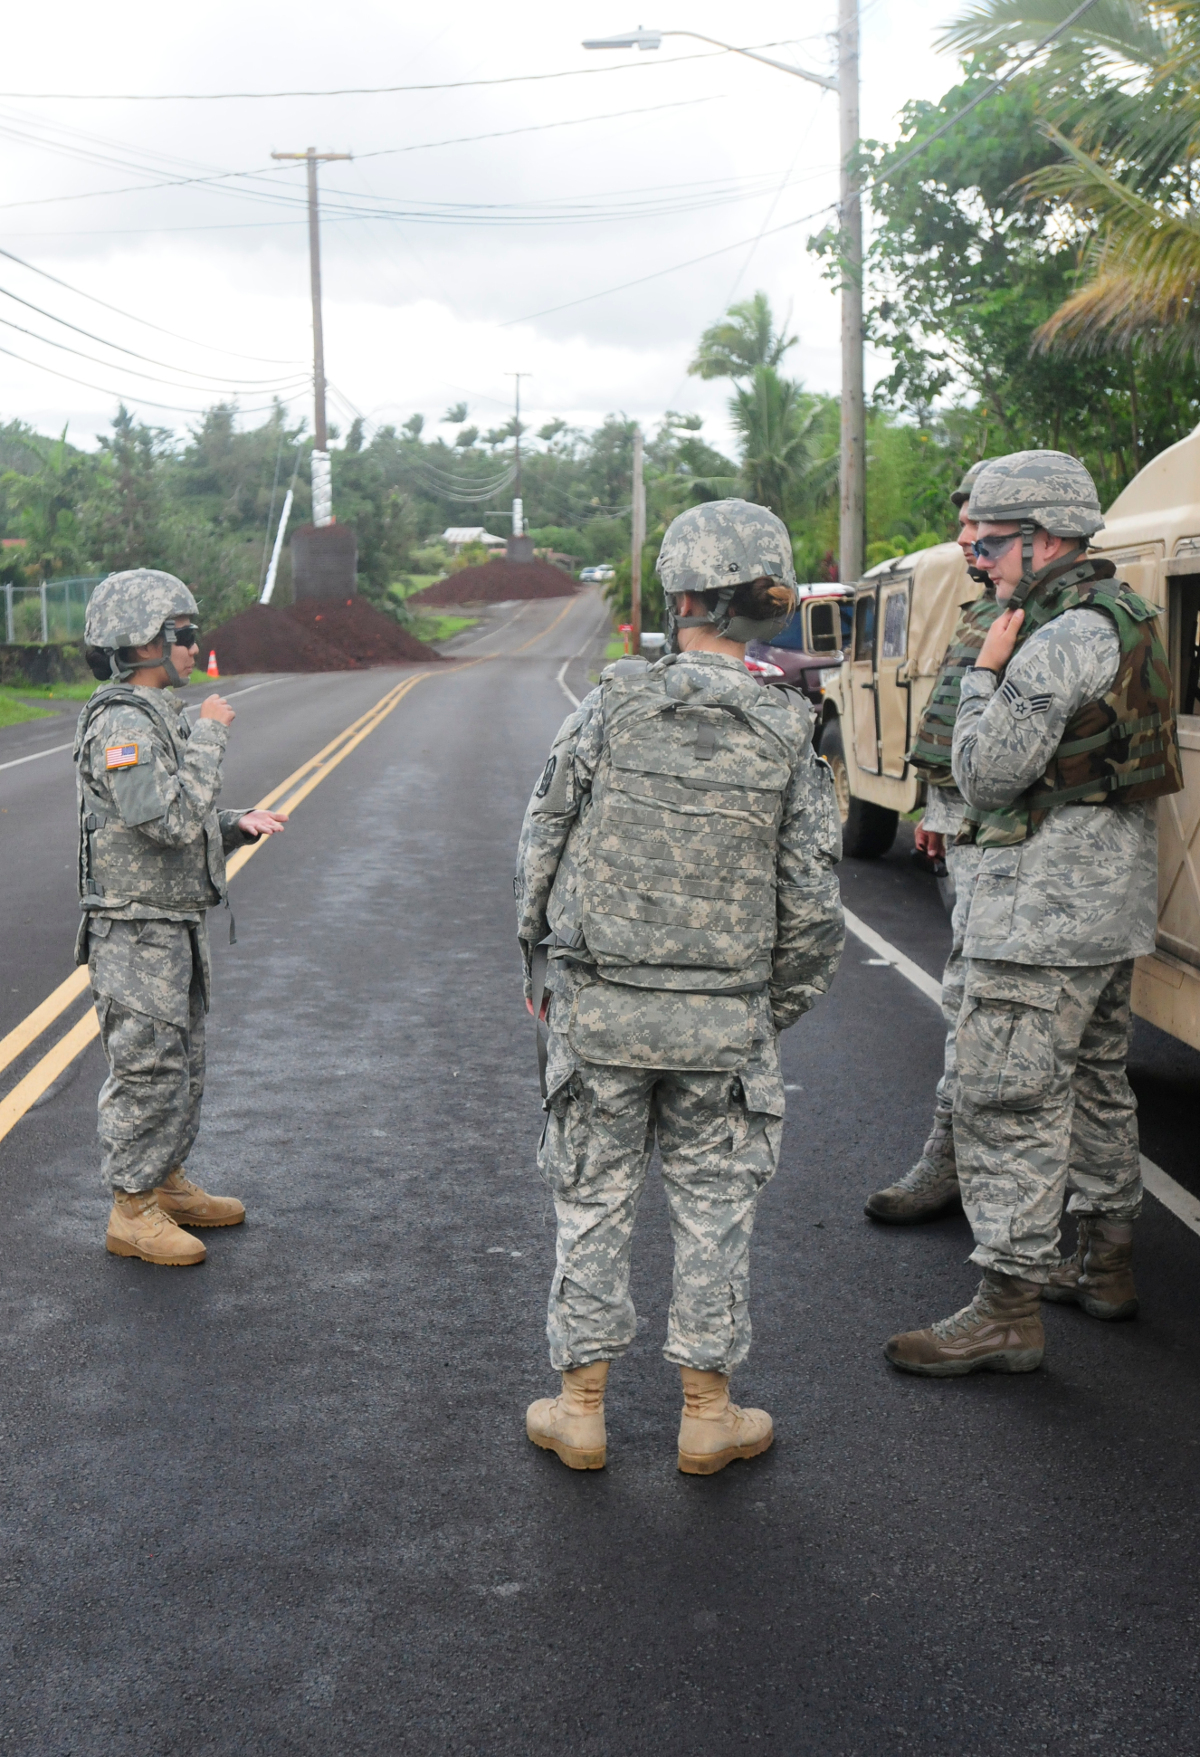 Pfc. Debney Jaramillo briefs her team prior to patrols in Puna, Hawaii, Oct. 30, 2014.  (U.S. Army National Guard photo by Staff Sgt. Katie Gray/Released)